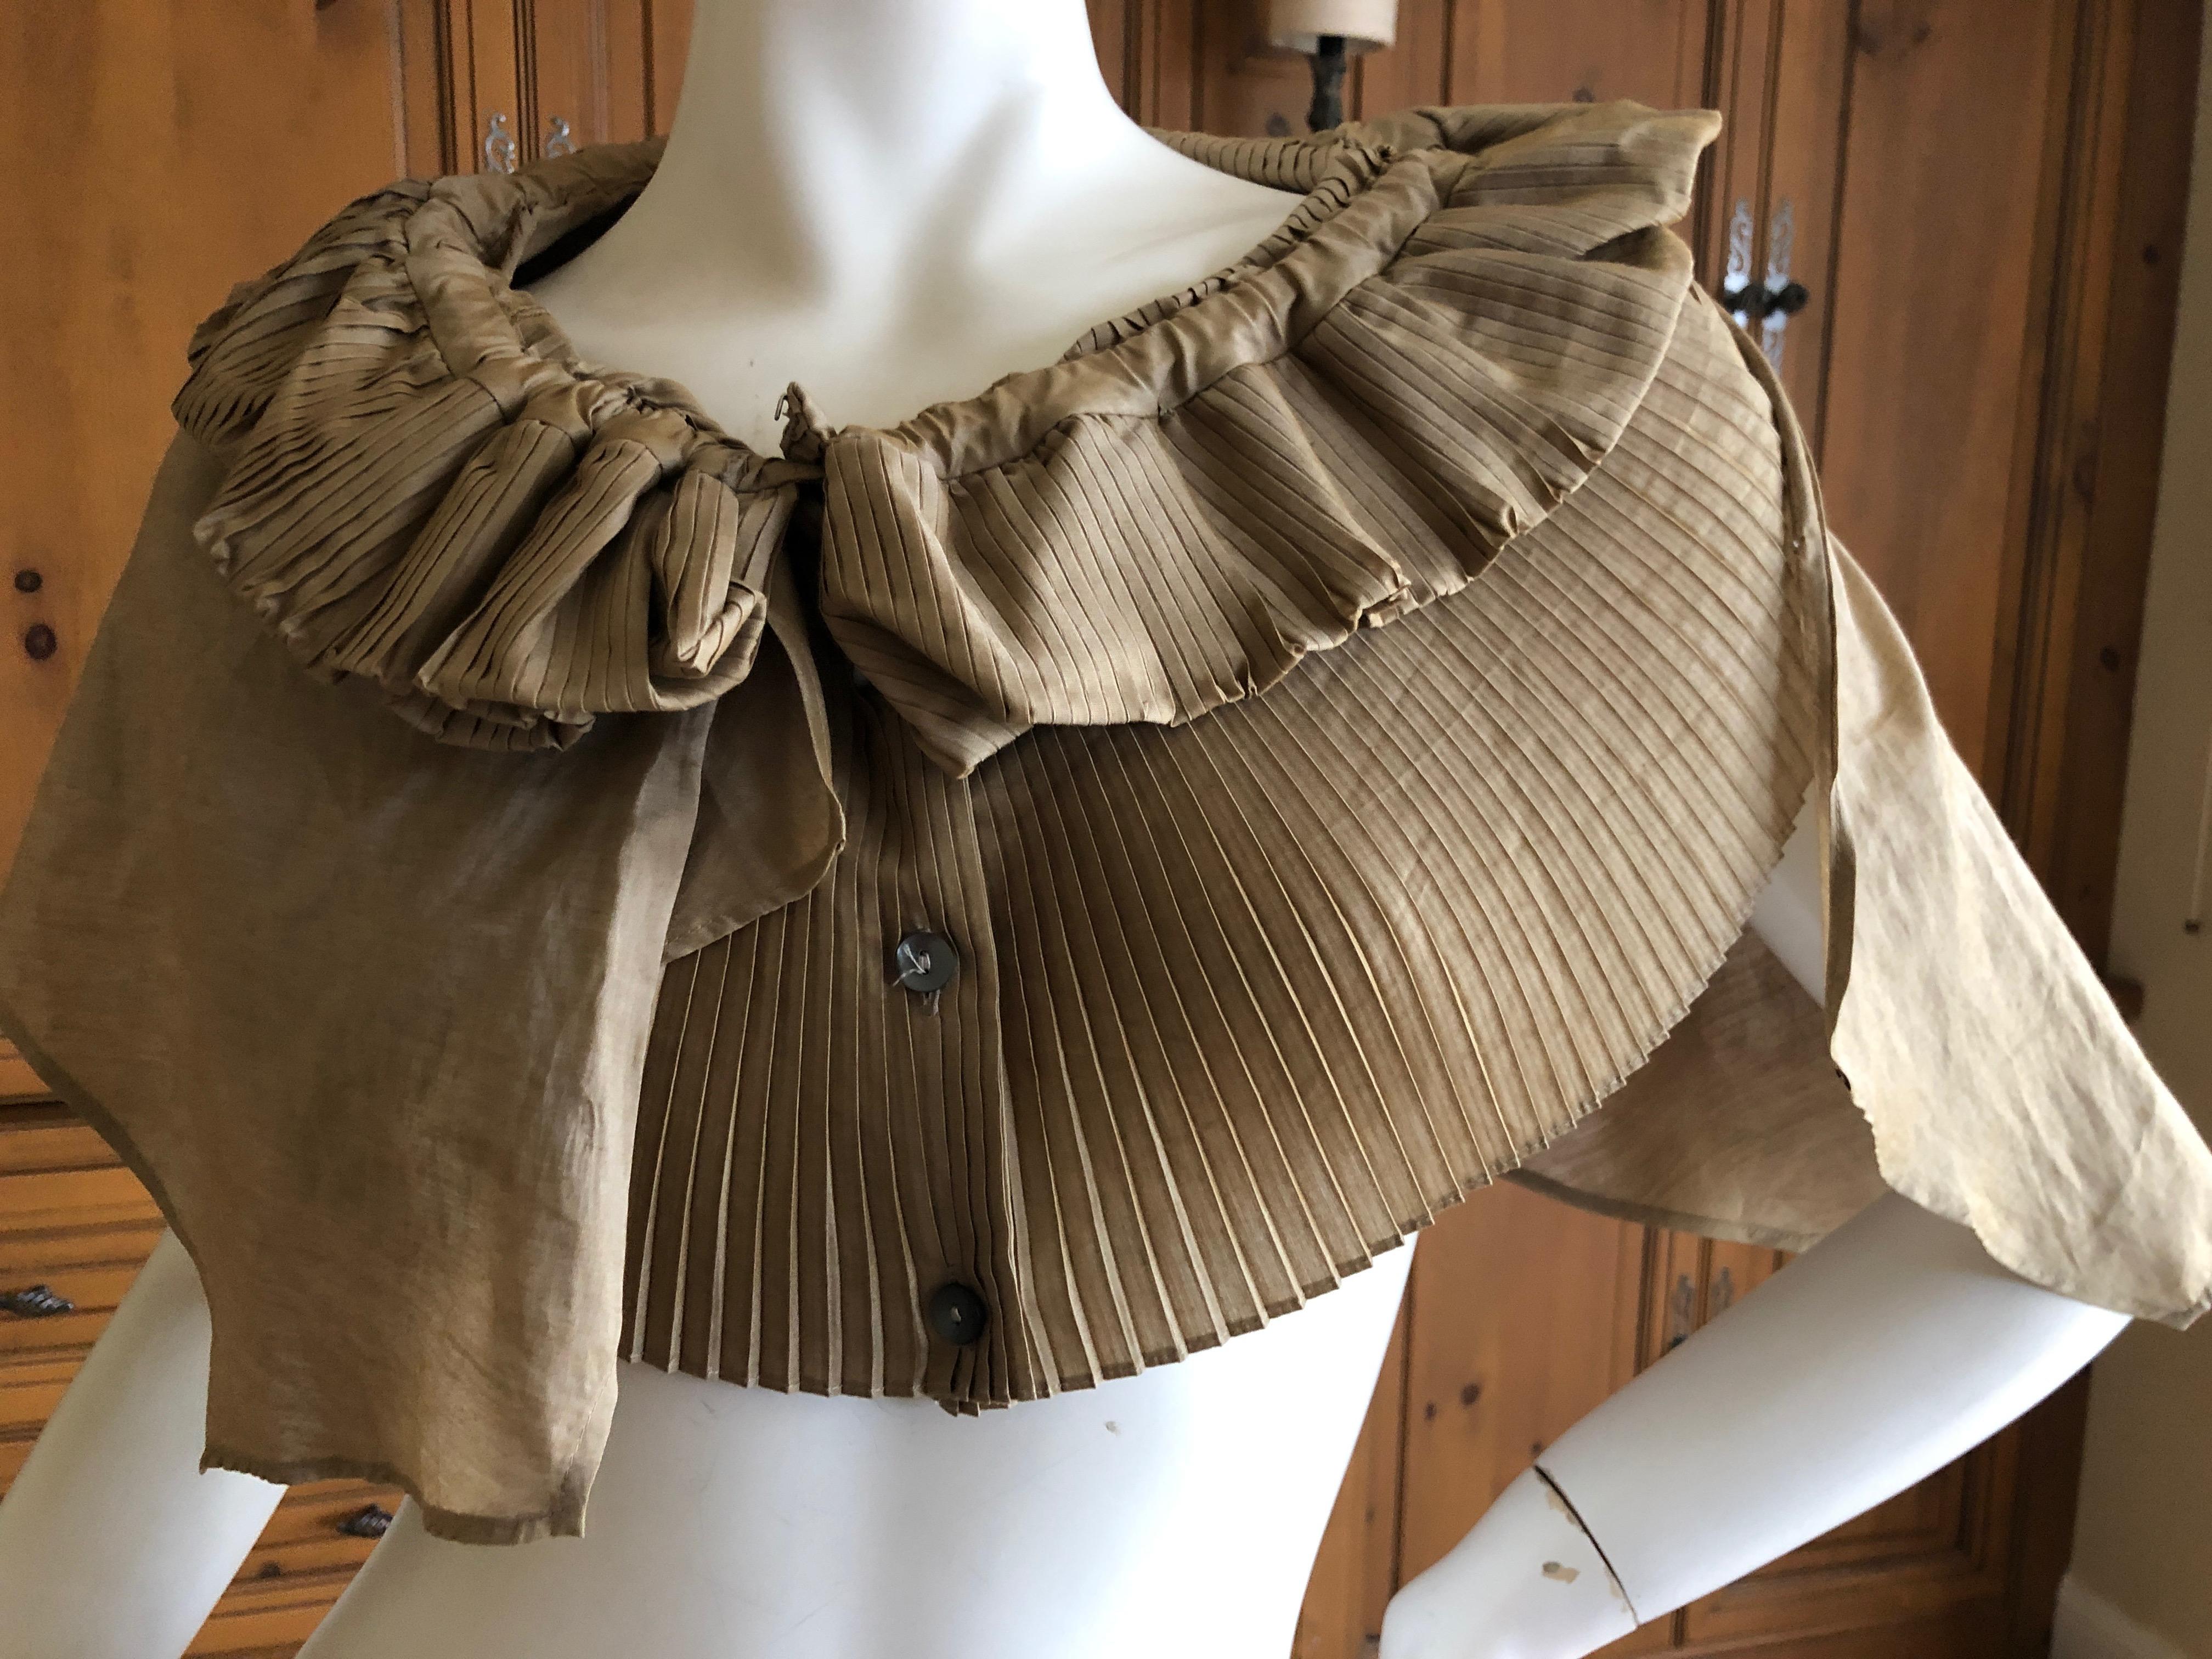 Romeo Gigli Vintage Pleated Ruffled Collar In Excellent Condition For Sale In Cloverdale, CA